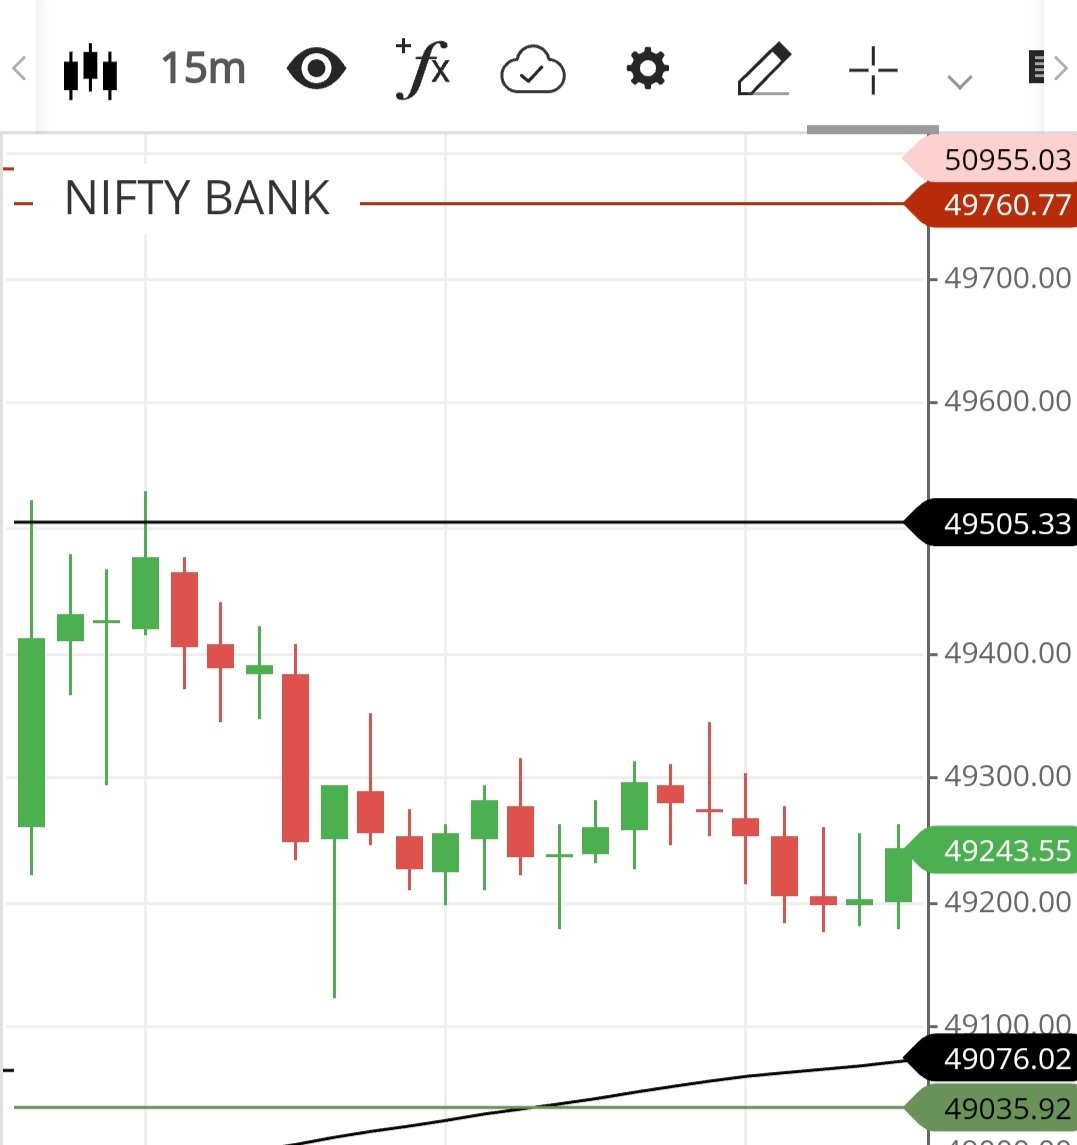 DAY 5 PERFORMANCE. BNF 49300 PE- 296 to 480. BNF 49500 CE- 310 to 345. After 11:00 a.m BNF was in range of 49200-49300. So no new trades has been taken. Telegram link in bio #optiontrading #Optionselling #NiftyBank #BankNiftyOptions #verifiedbysensibull #banknifty #zerodha